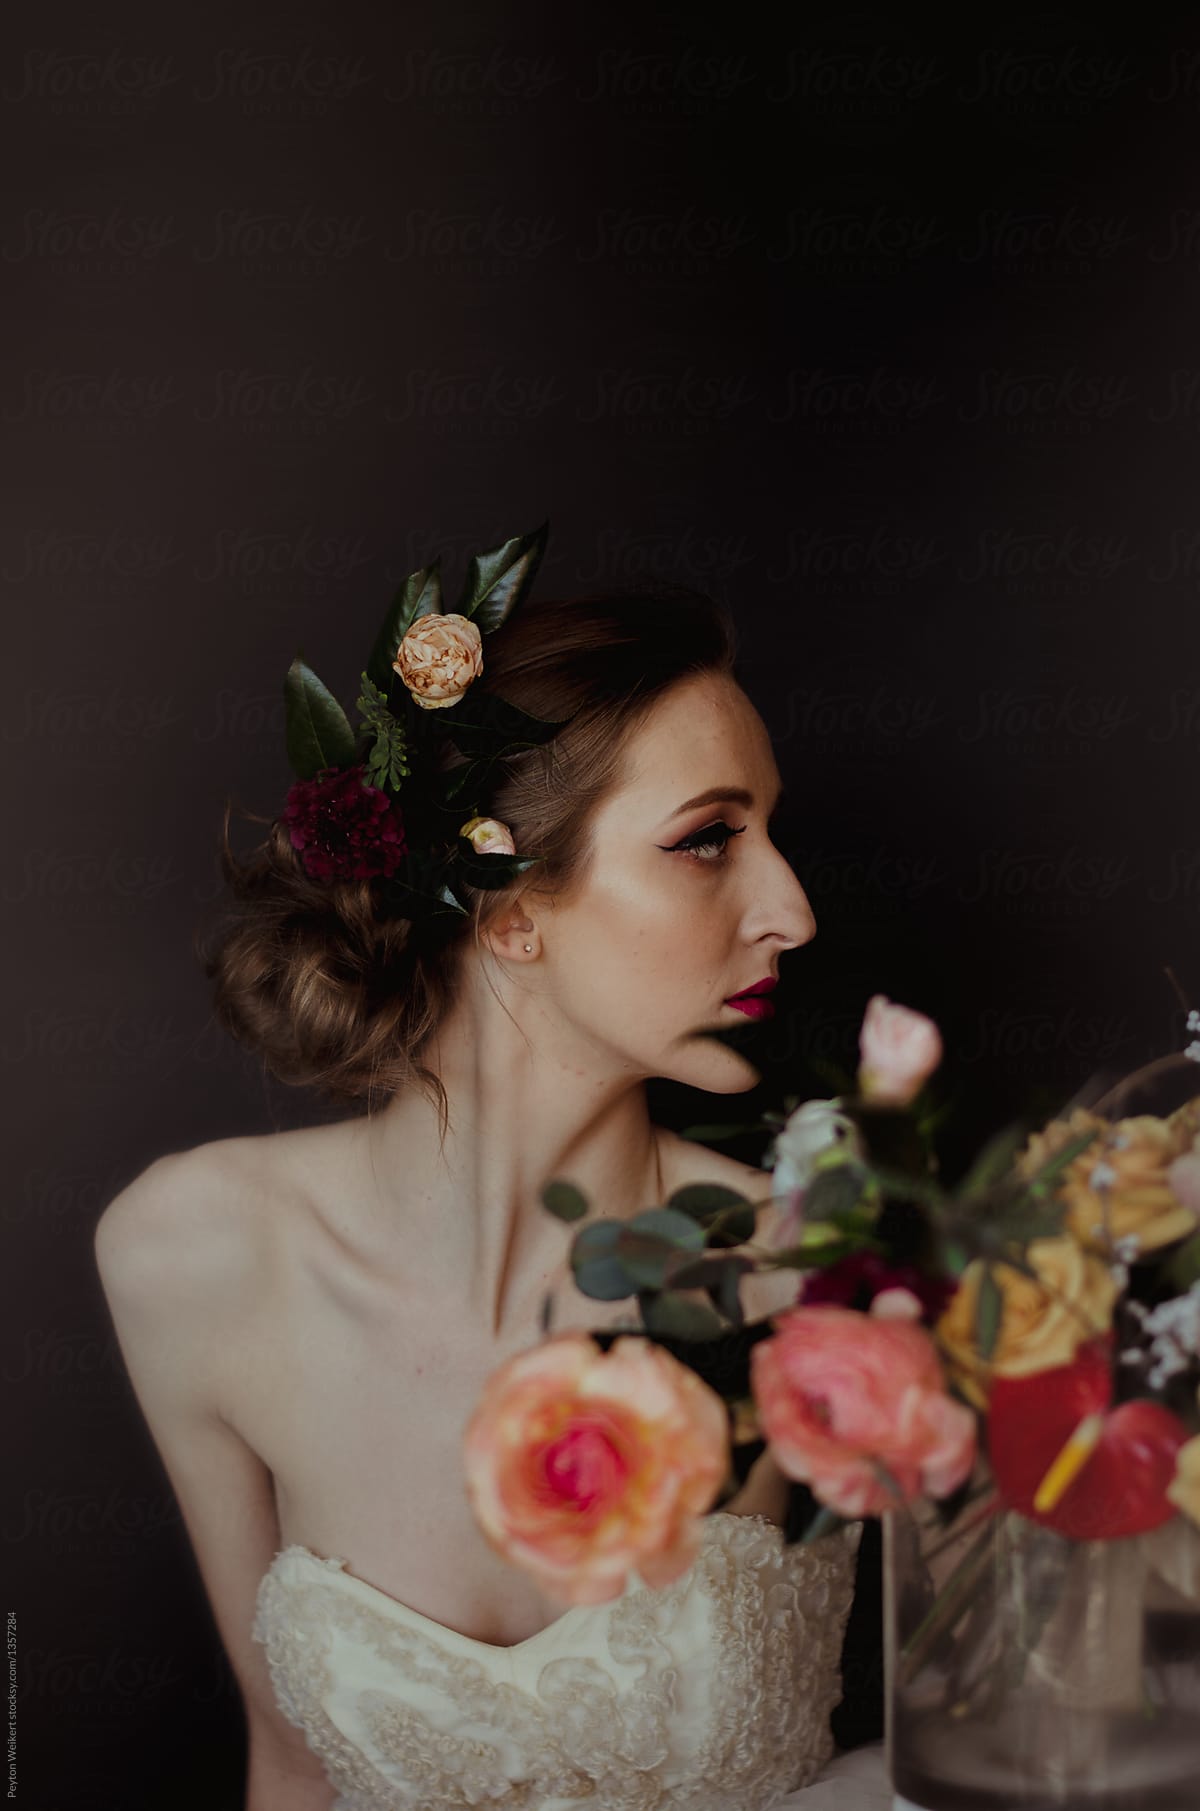 Vintage Bride with Large Bouquet of Flowers